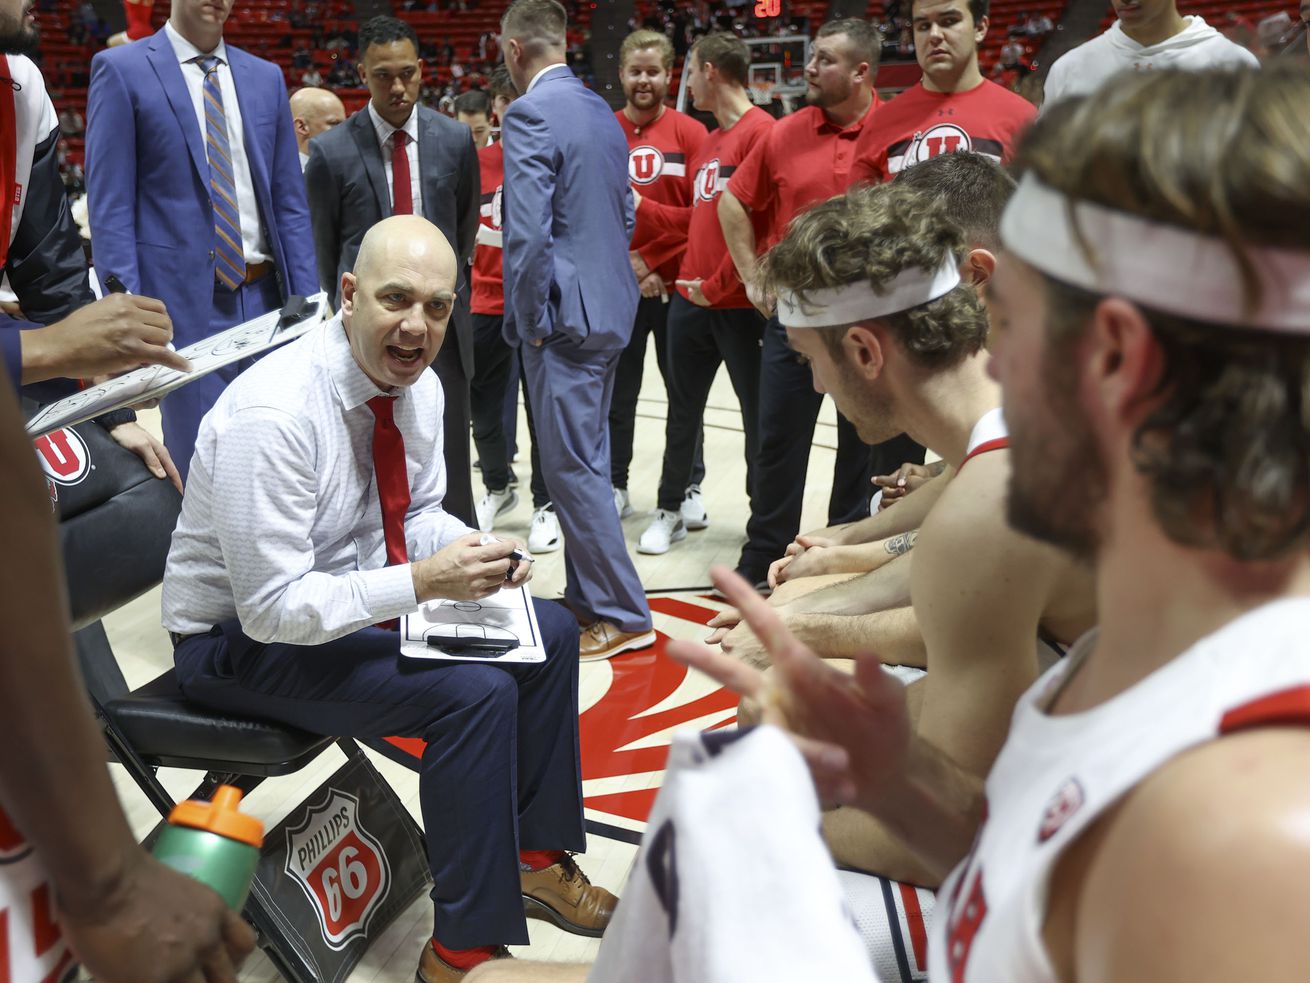 Utah Utes head coach Craig Smith talks to his team during a media timeout in a men’s basketball game against the Fresno State Bulldogs at the Huntsman Center in Salt Lake City on Tuesday, Dec. 21, 2021. Utah won 55-50.